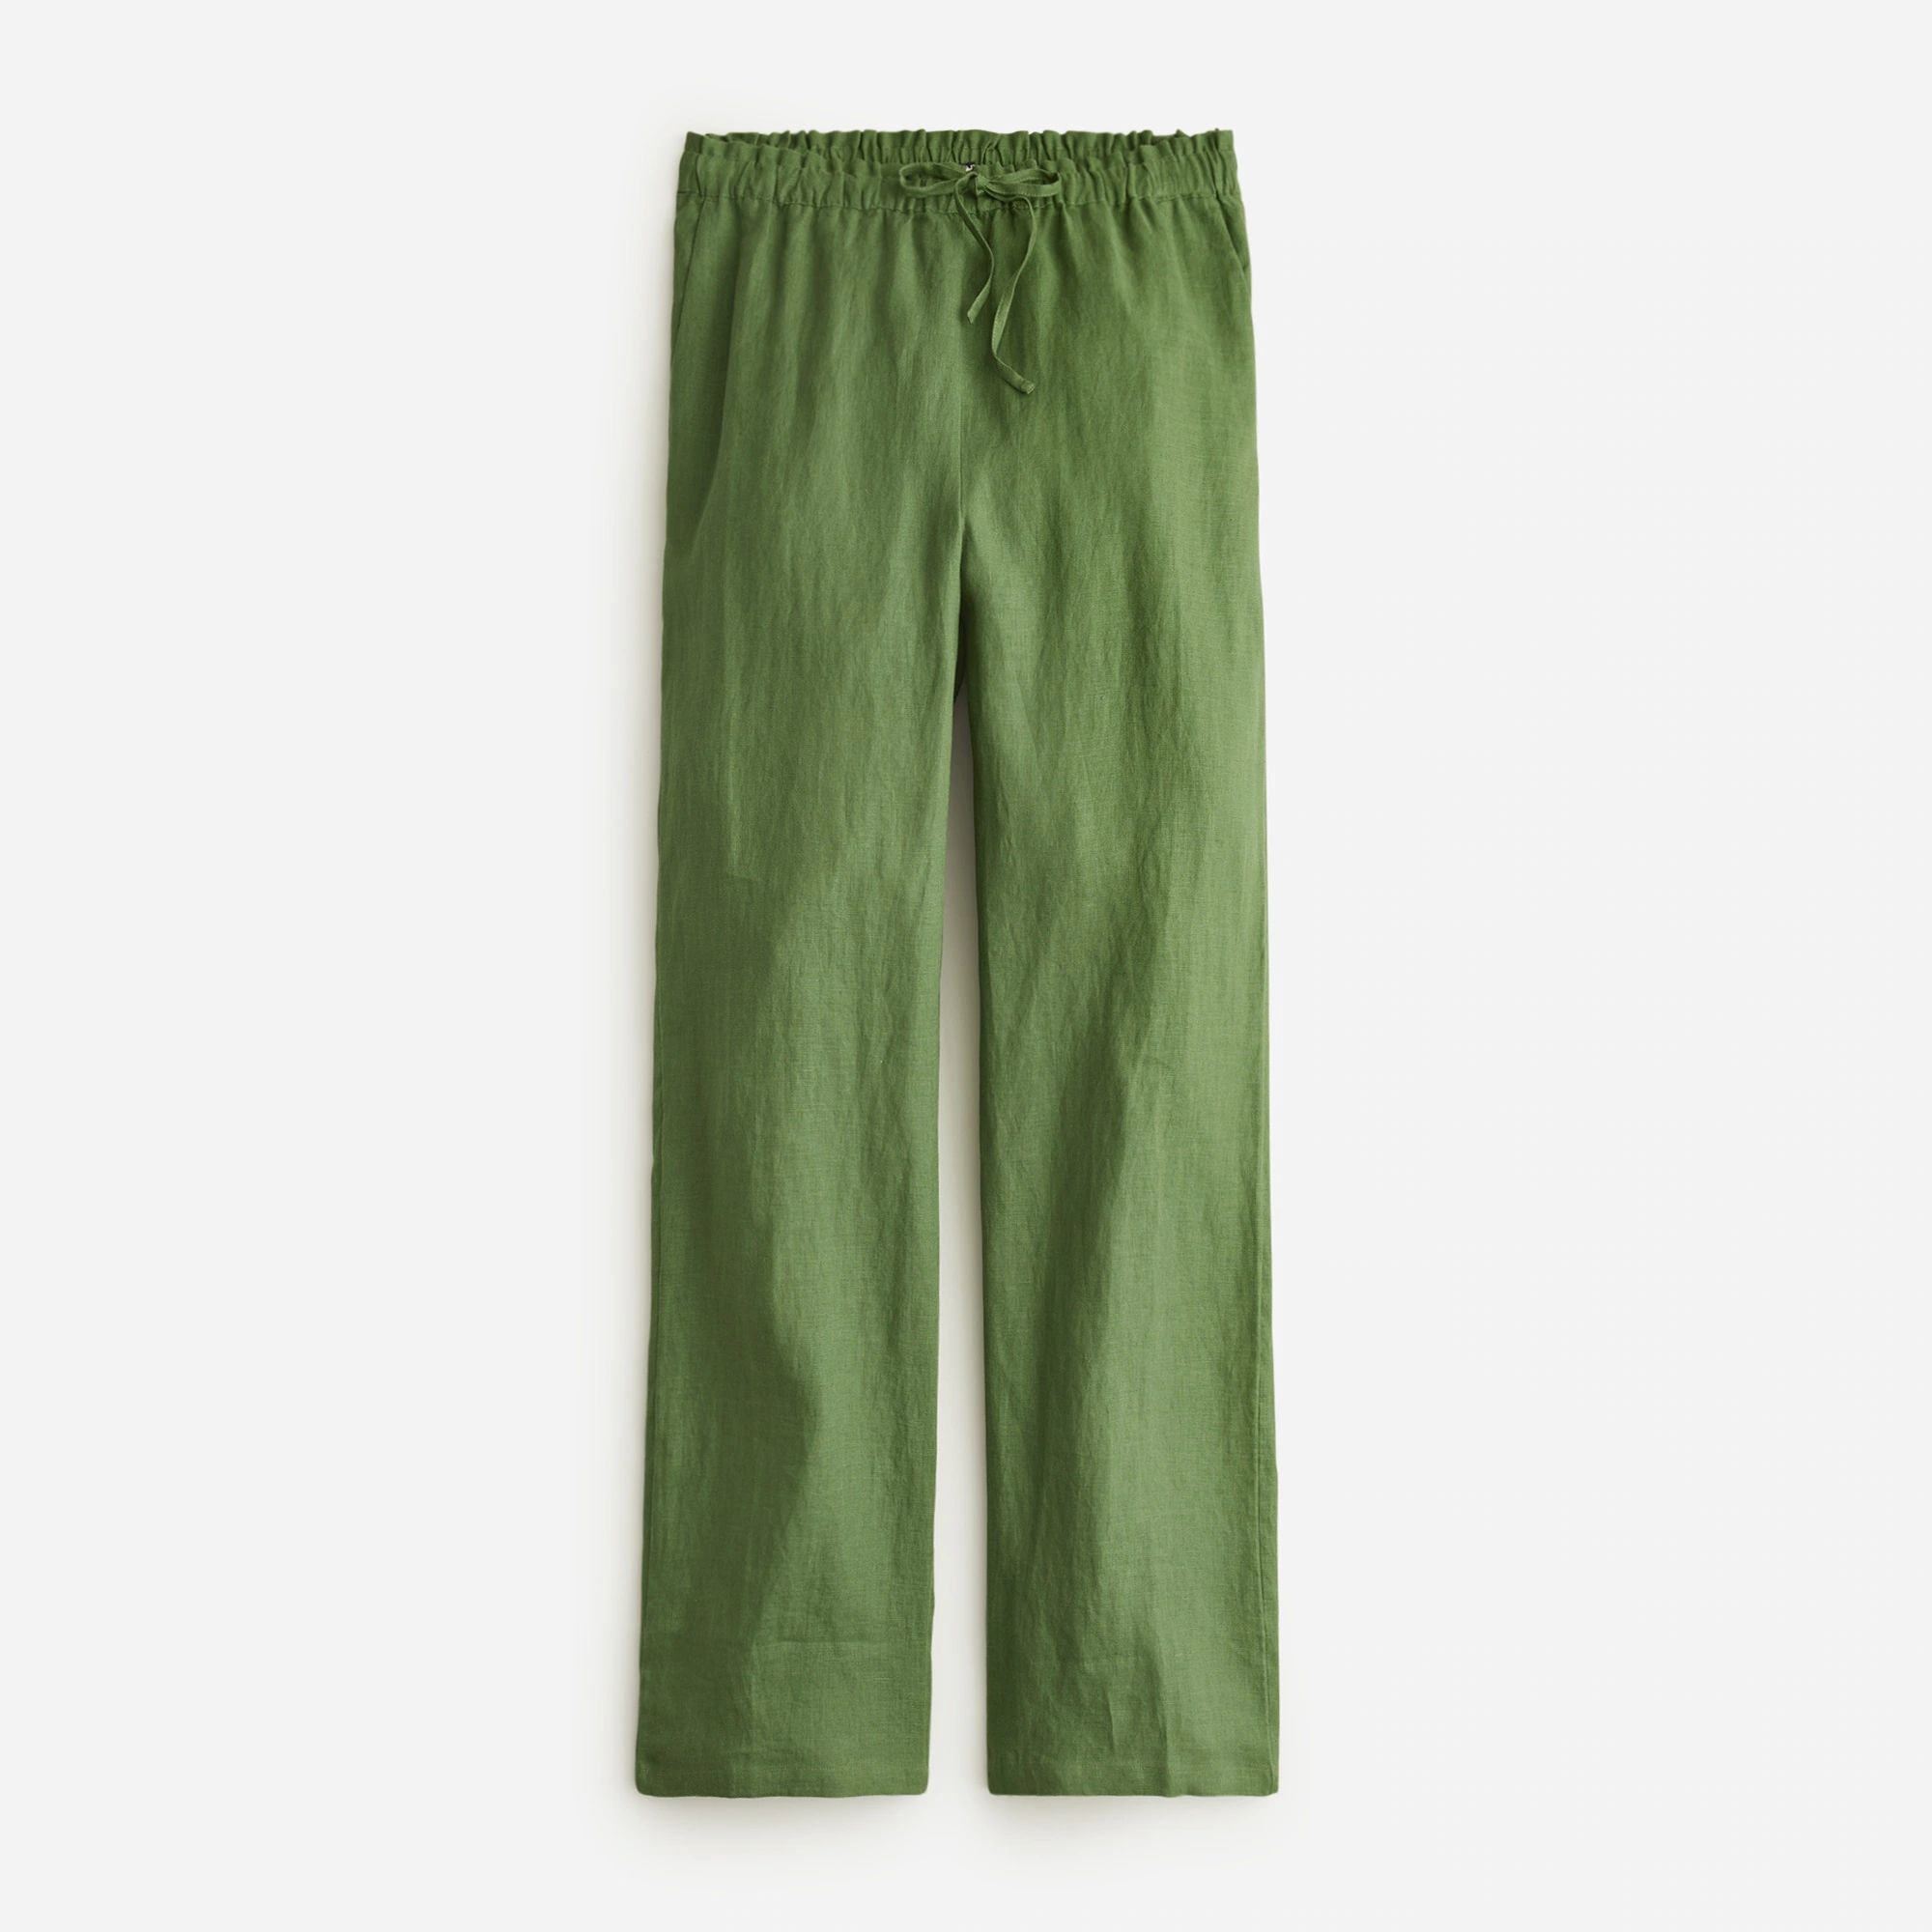 best seller3.9(18 REVIEWS)Soleil pant in linen$79.50$98.00 (19% Off)Limited-time Chinos Deal. Pri... | J.Crew US